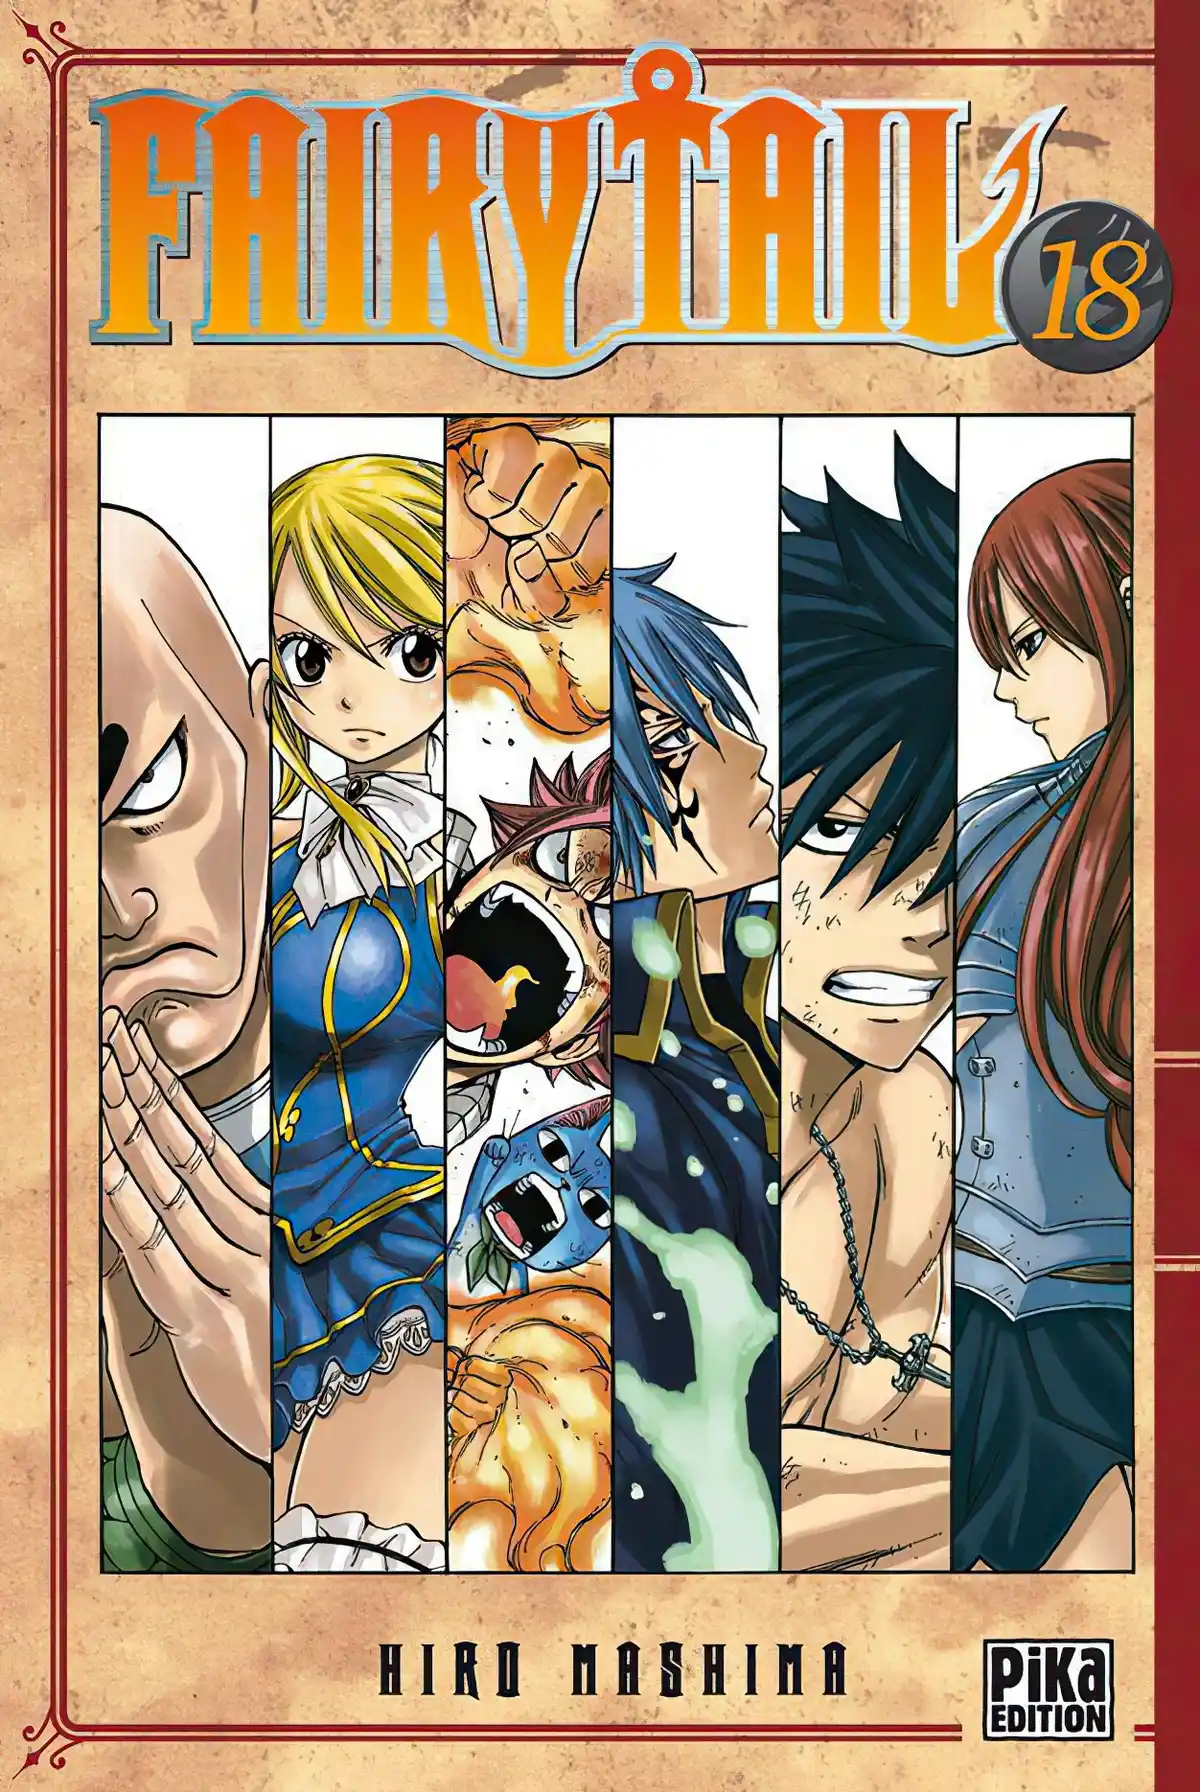 Fairy Tail Volume 18 page 1